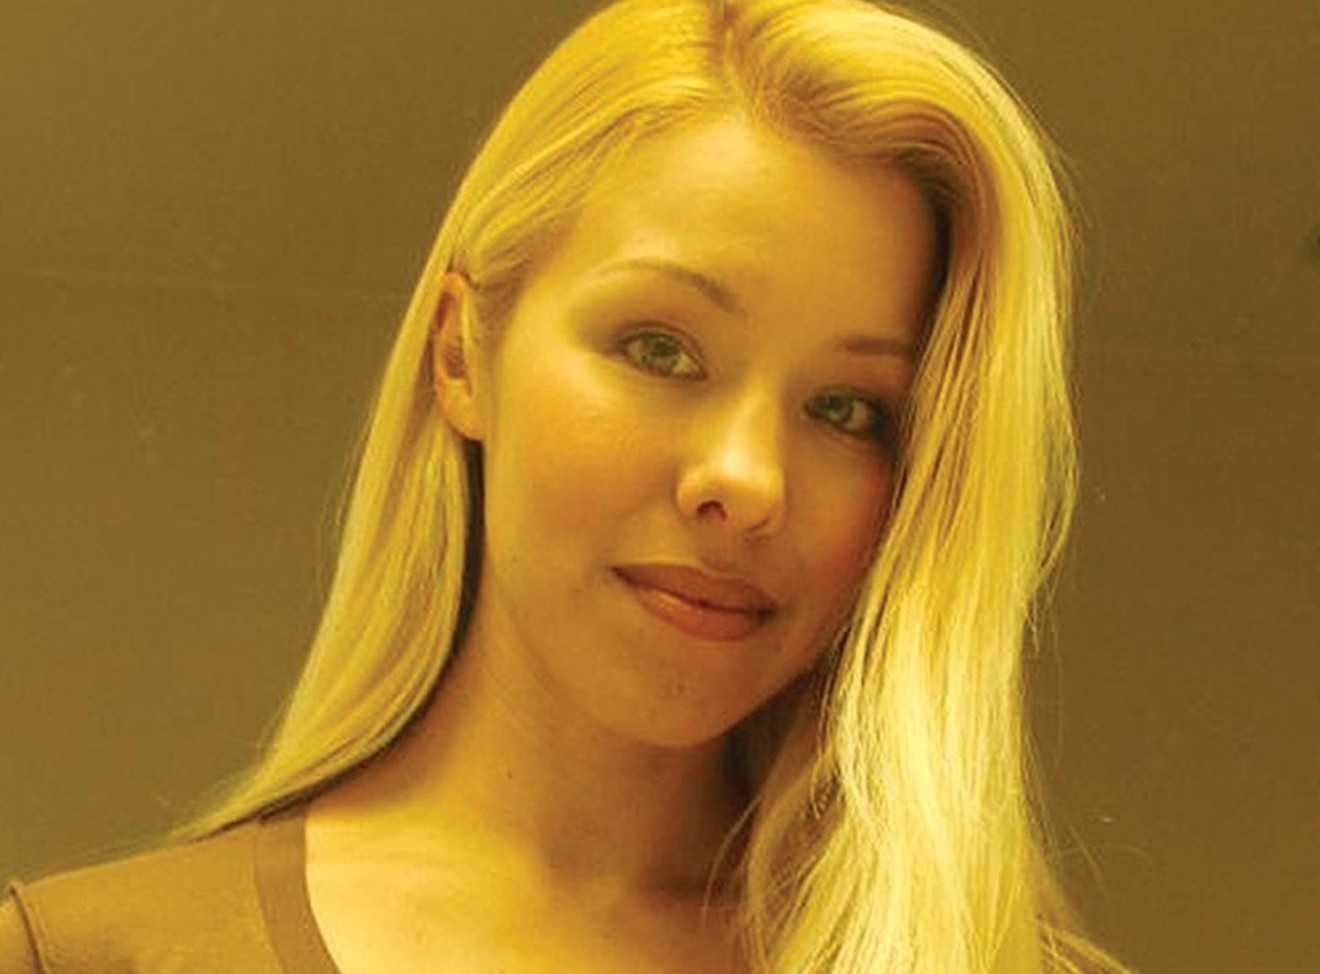 Jodi Arias murder trial captured the nation's attention with it's lurid details